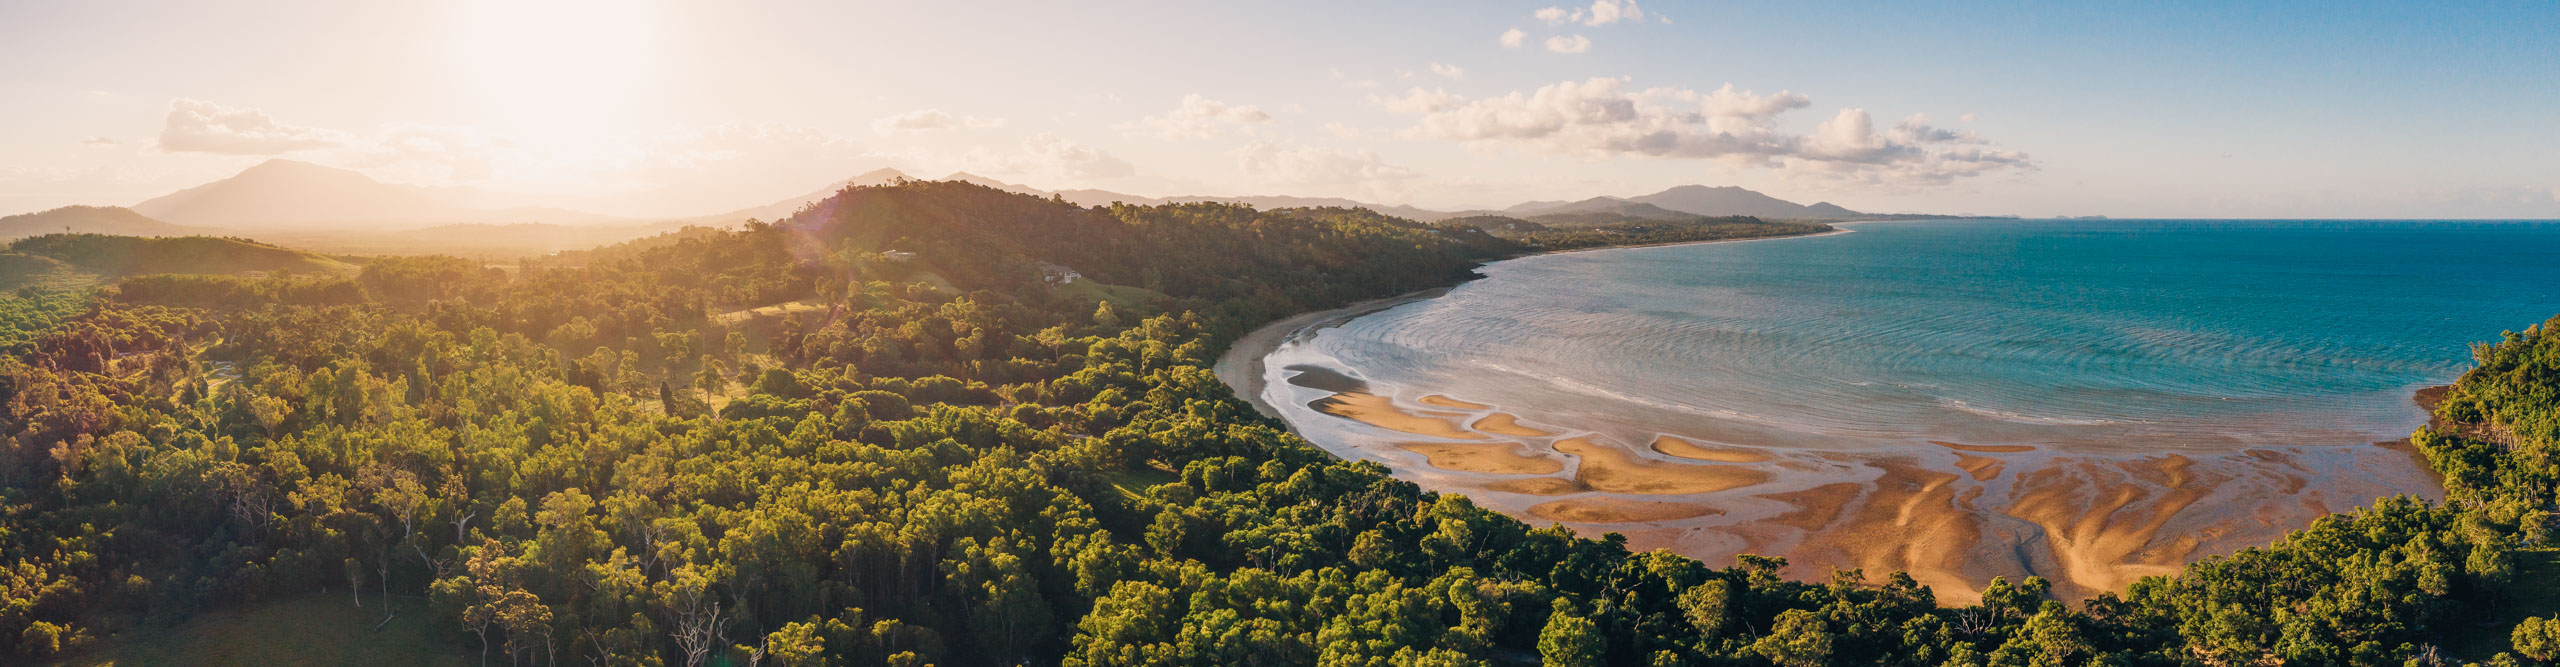 Aerial view of Hull river national park and the Kennedy walking track in Mission Beach, Queensland